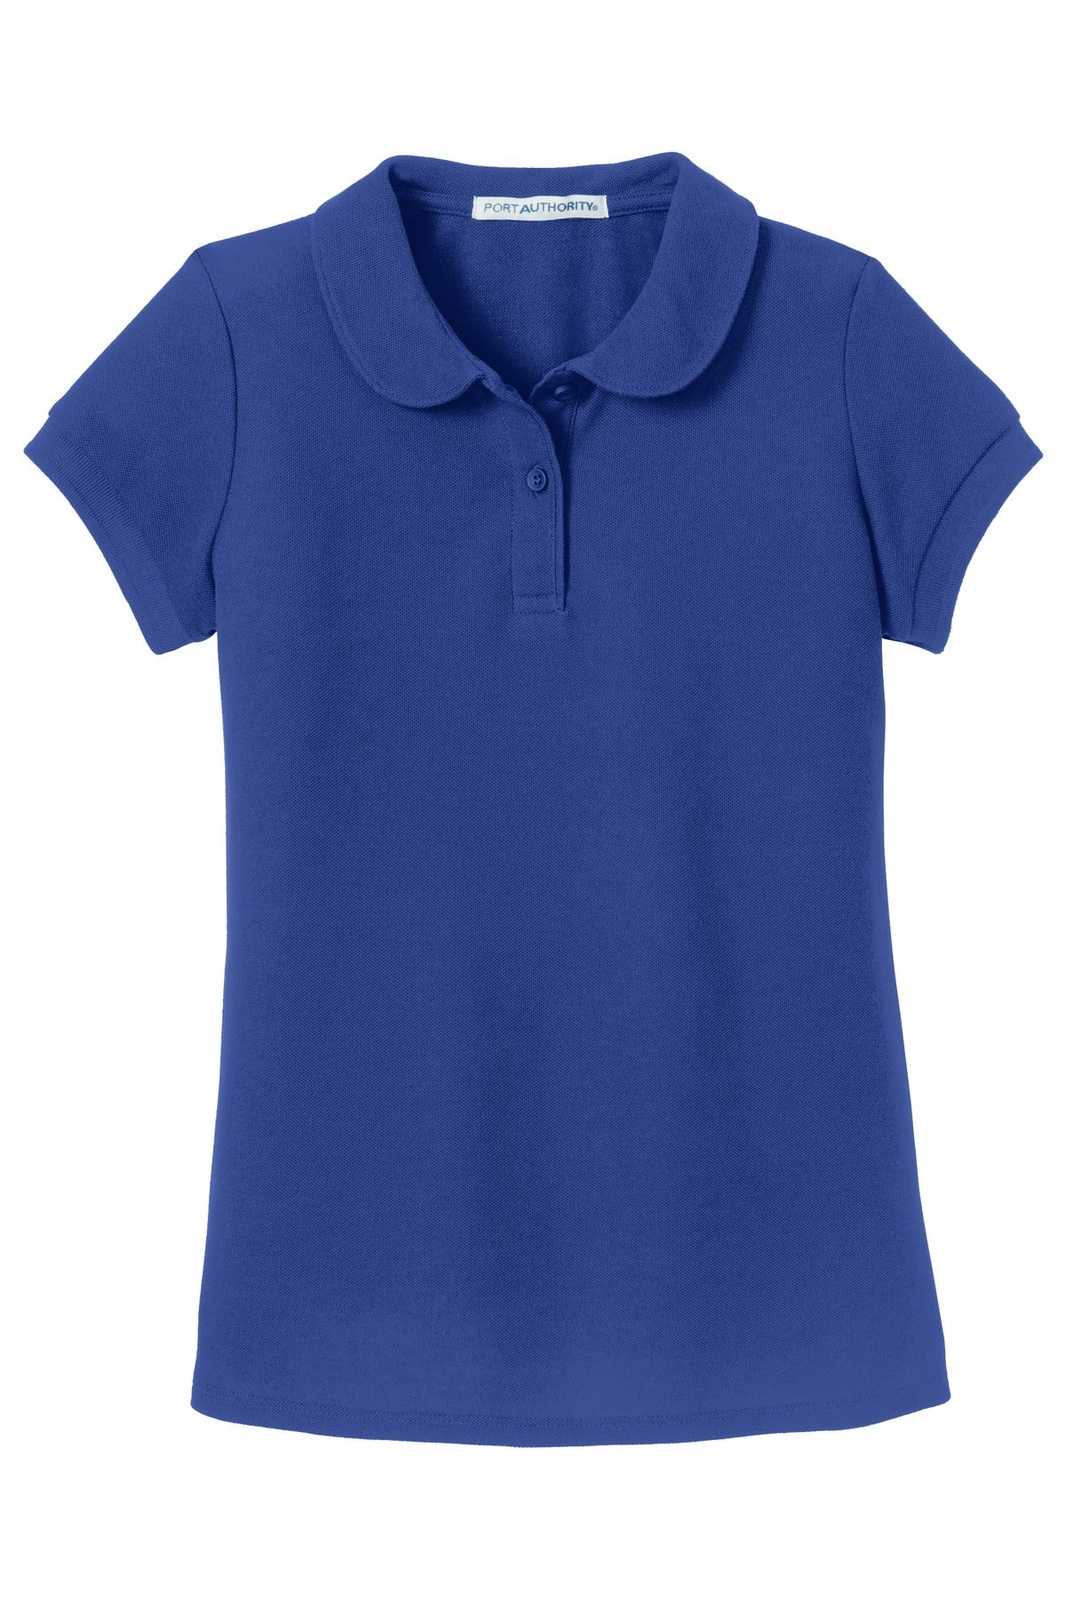 Port Authority YG503 Girls Silk Touch Peter Pan Collar Polo - Royal - HIT a Double - 5